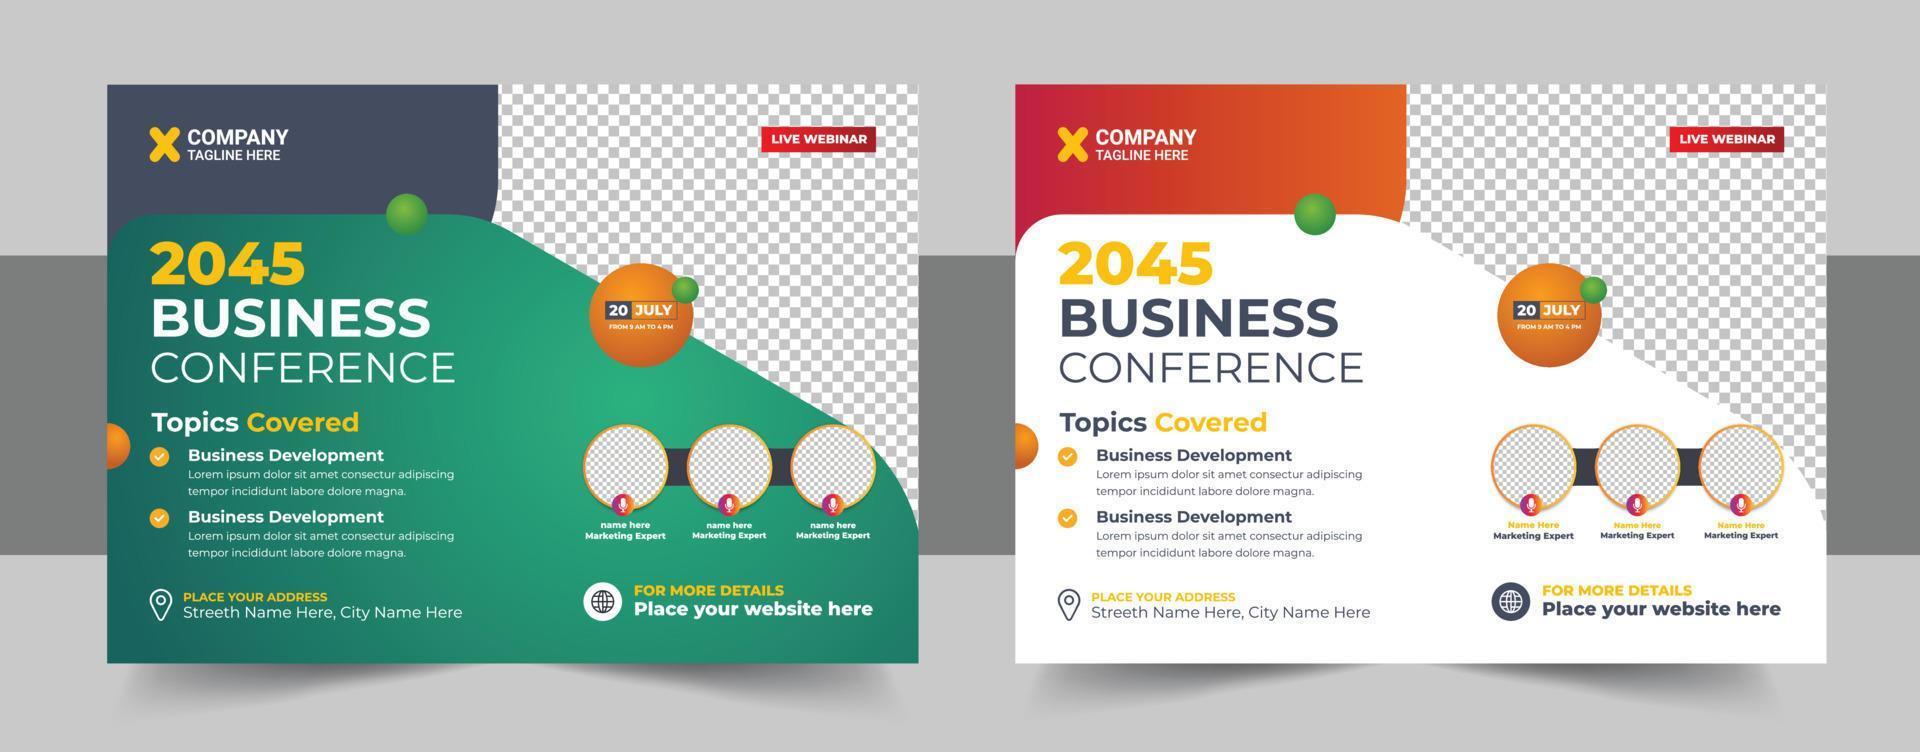 Horizontal online business conference flyer template bundle or event conference social media banner layout vector